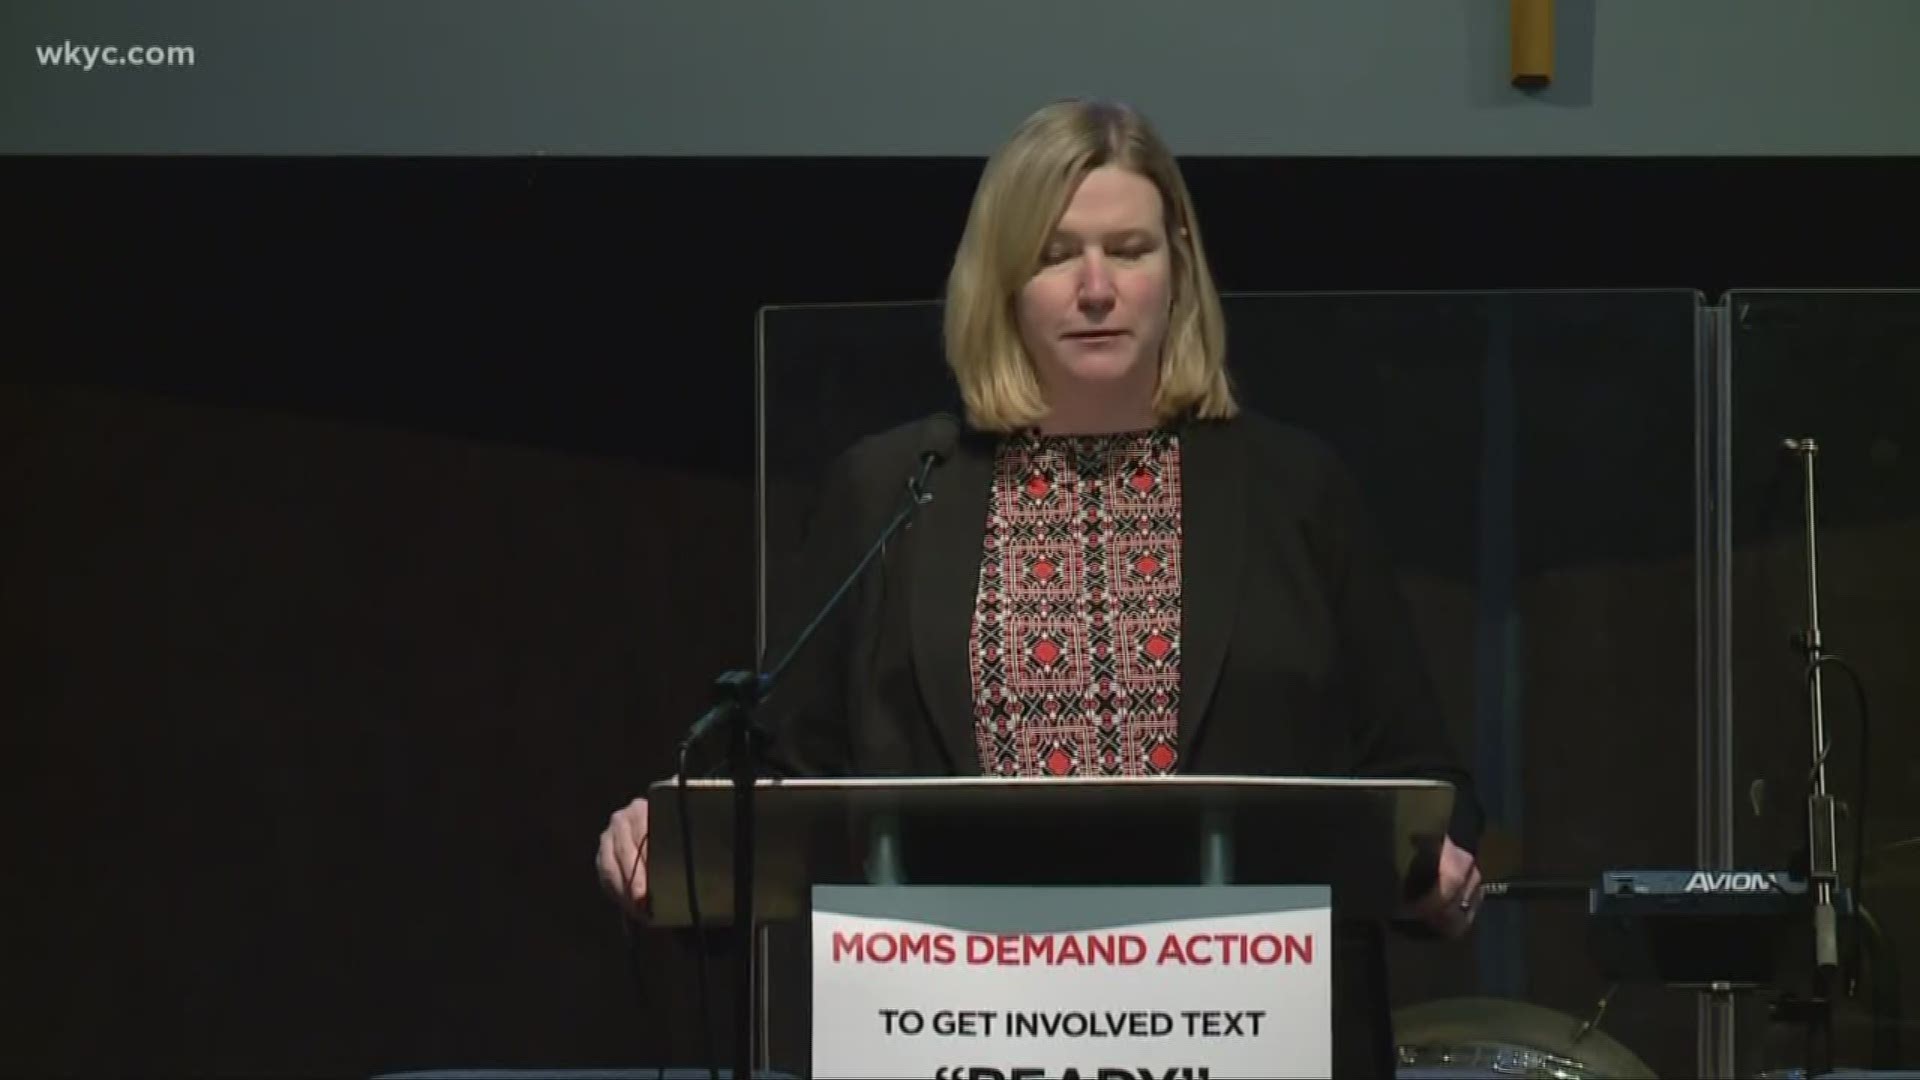 Dayton Mayor, Nan Whaley spoke out against gun violence Sunday. She since the mass shooting she's become and advocate for smart gun reform.